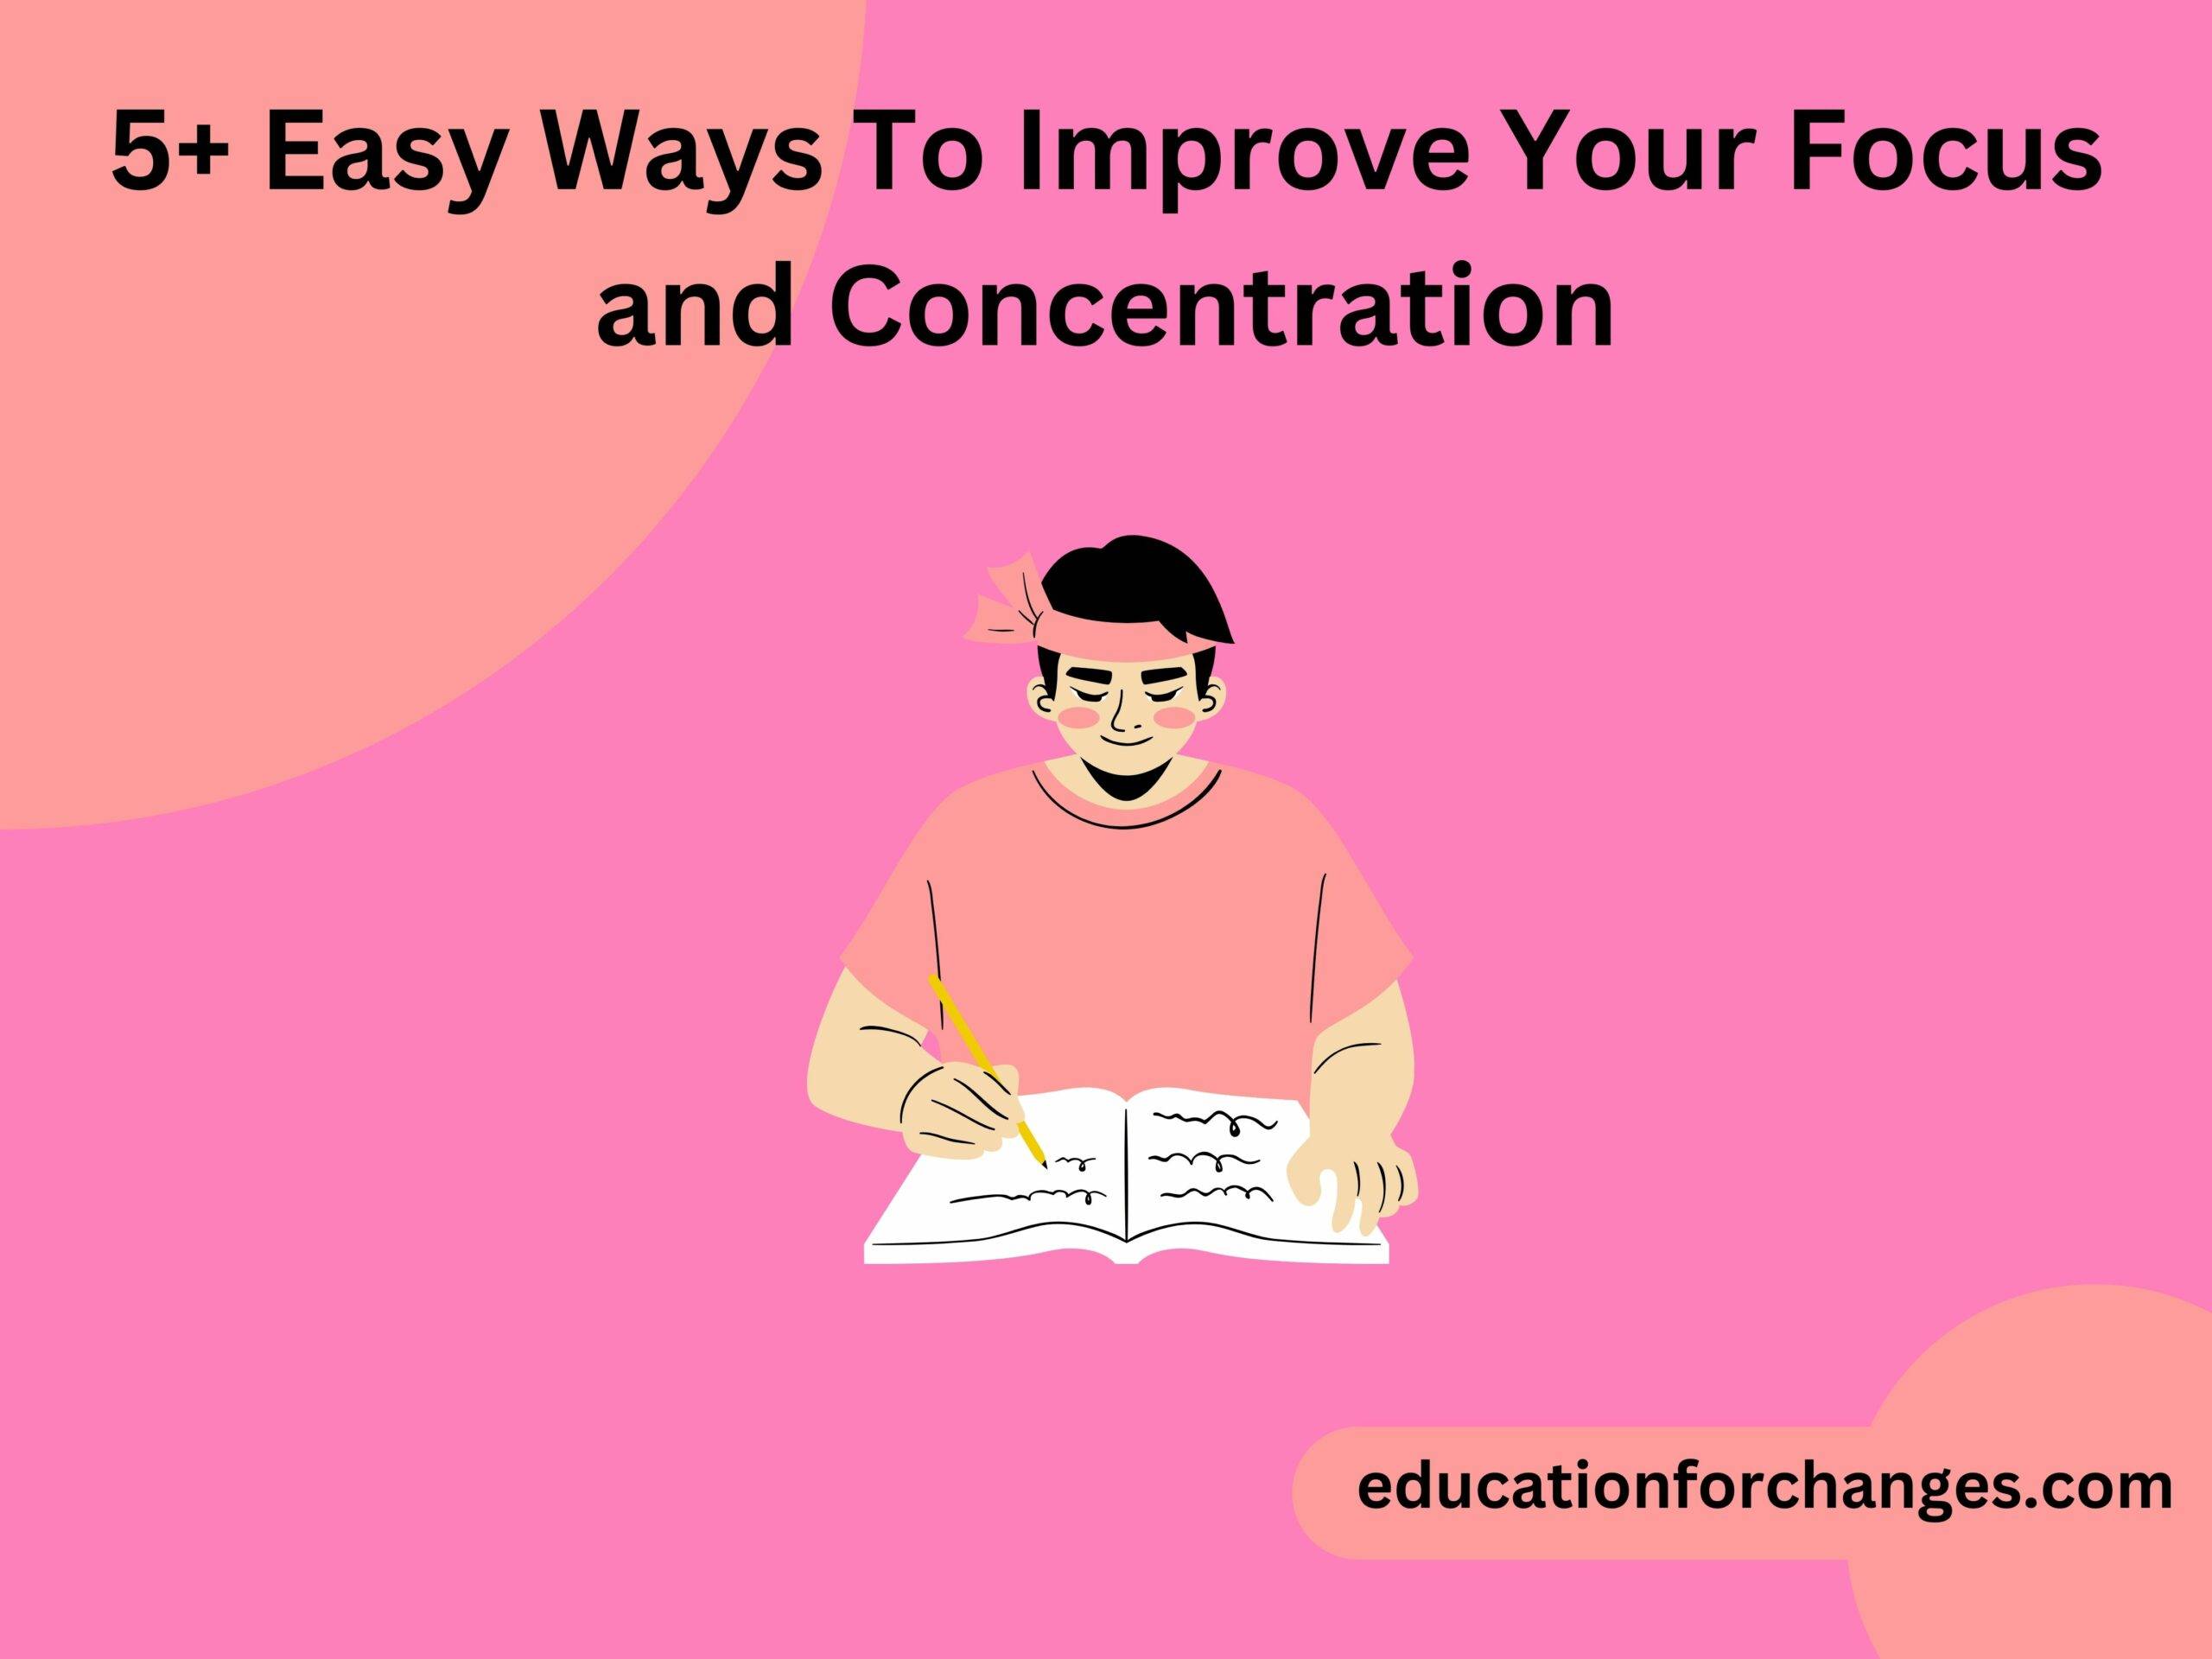 5+ Easy Ways To Improve Your Focus and Concentration